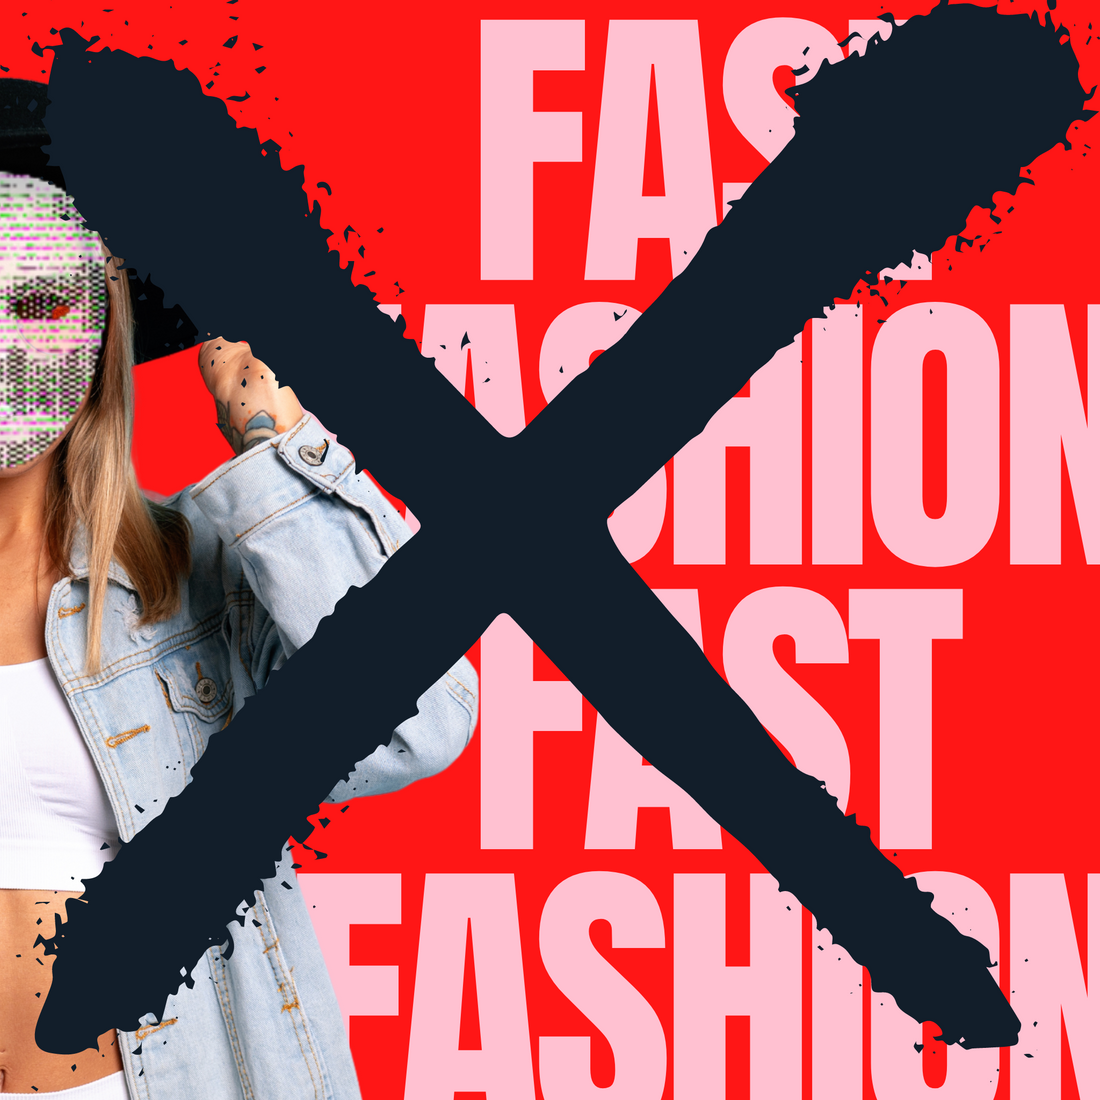 The end of fast fashion